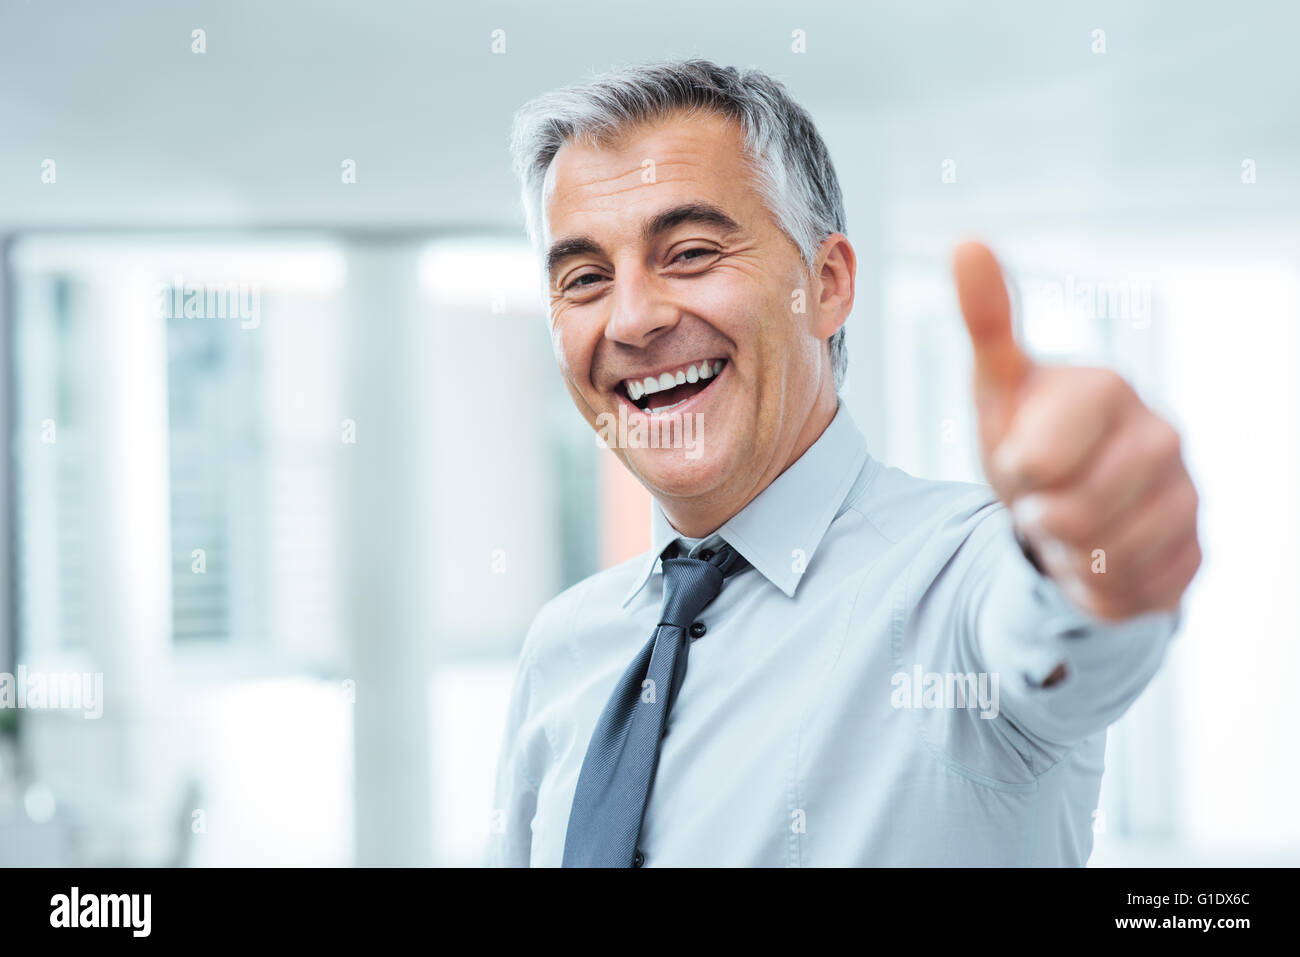 Thumbs up Cheerful businessman posing and smiling at camera Banque D'Images